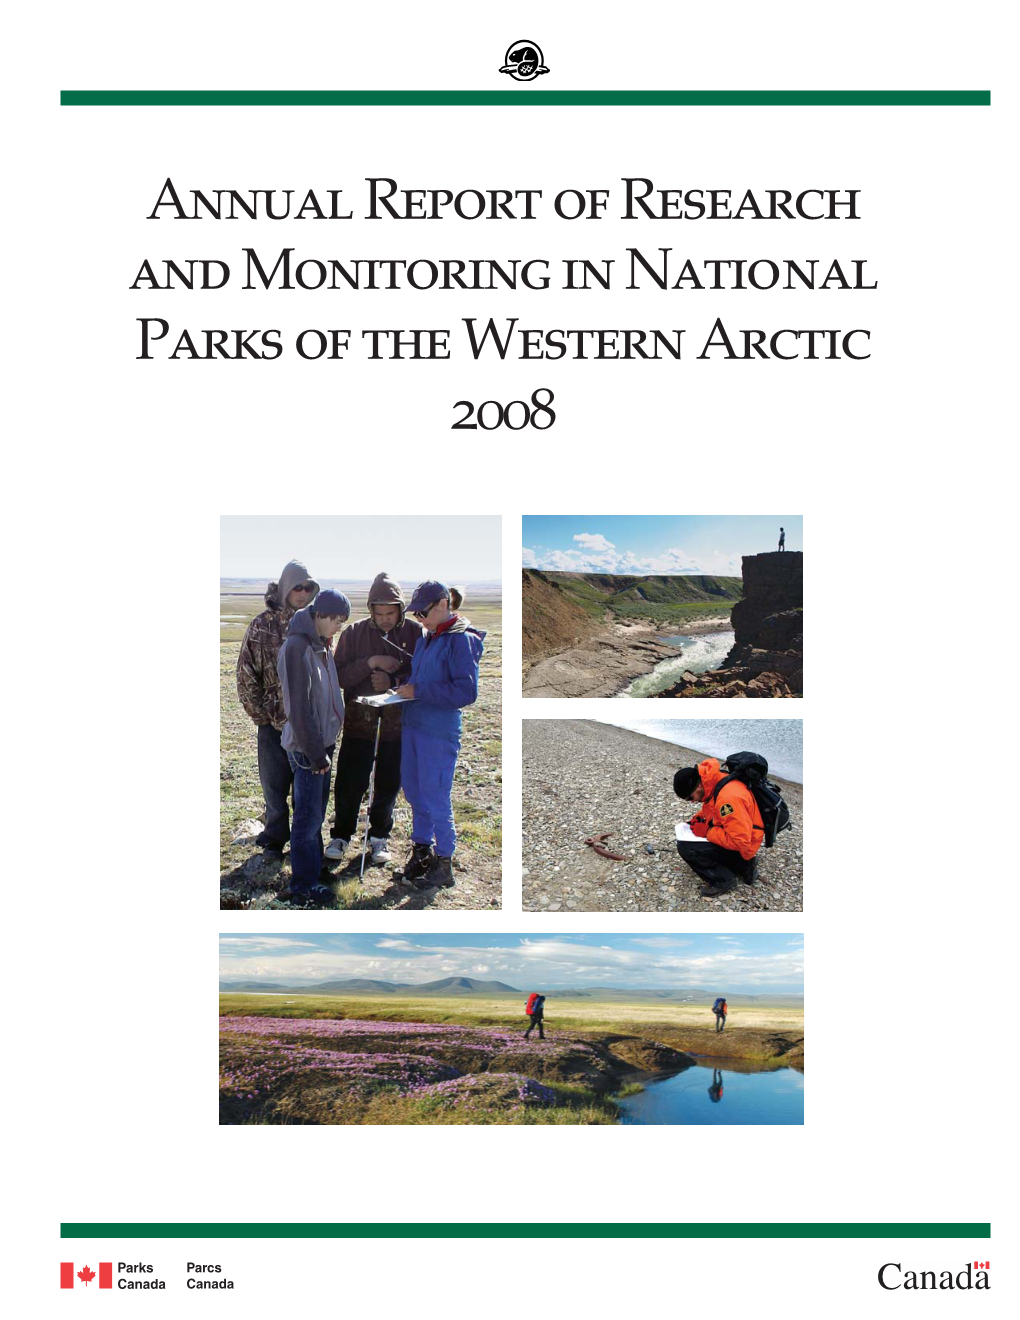 Annual Report of Research and Monitoring in National Parks of the Western Arctic 2008 ACKNOWLEDGEMENTS